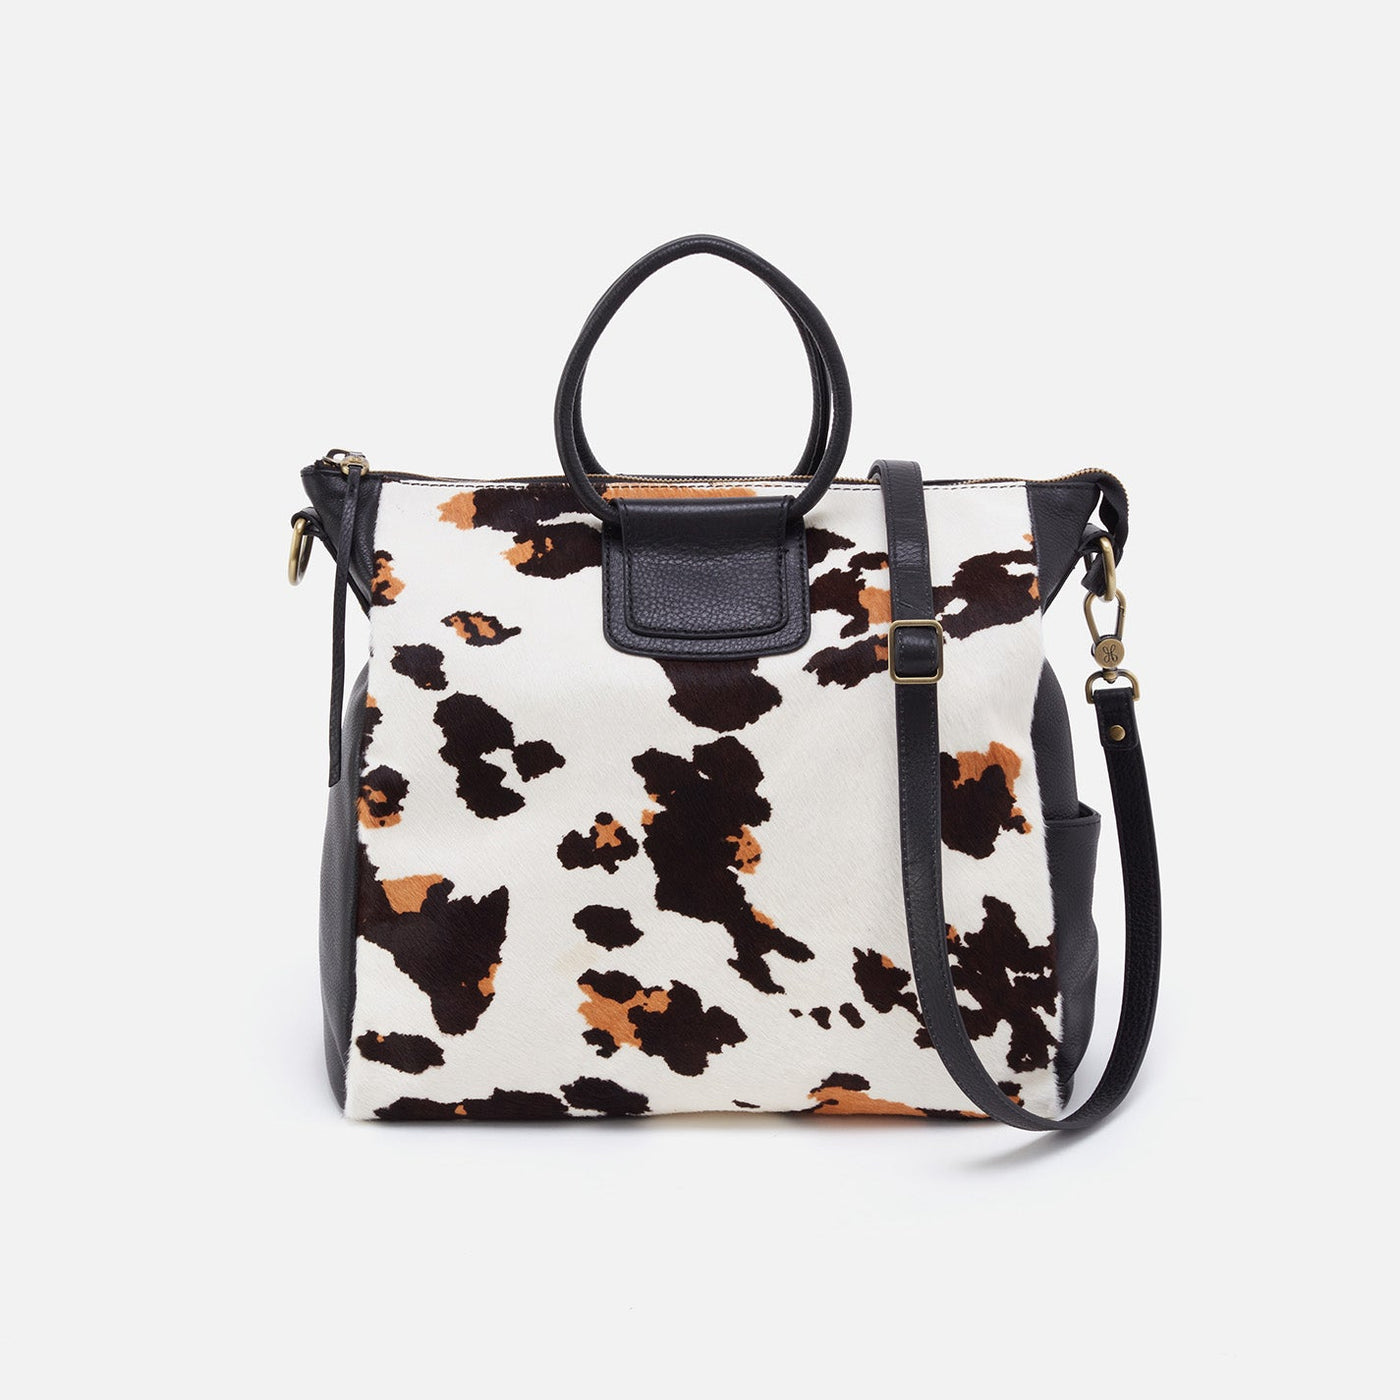 Sheila Large Satchel in Hair-On Leather - Cow Print Black and Brown